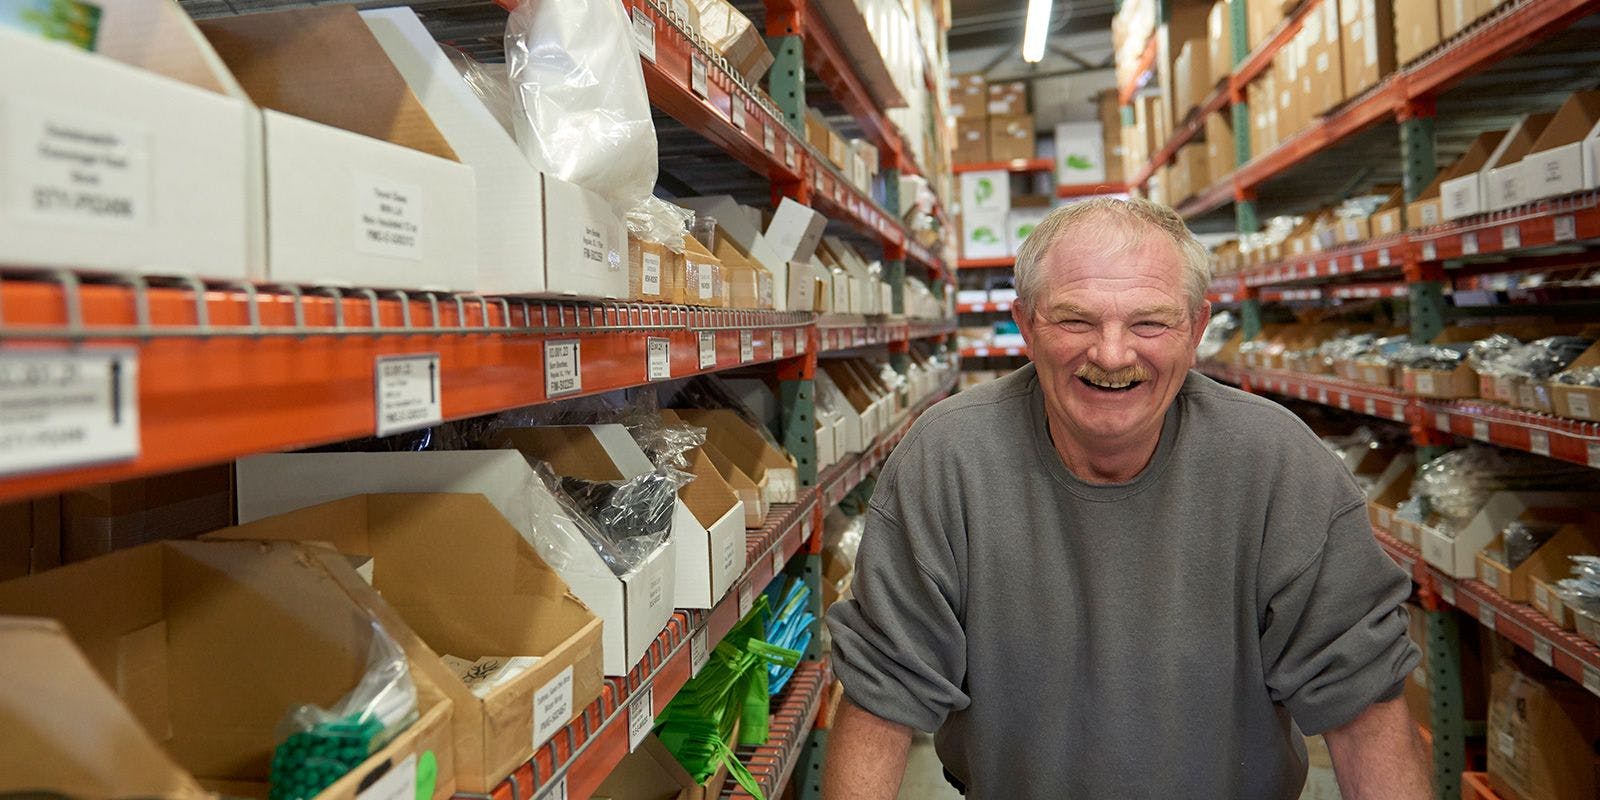 Organic Valley warehouse employee picks products along the aisles.